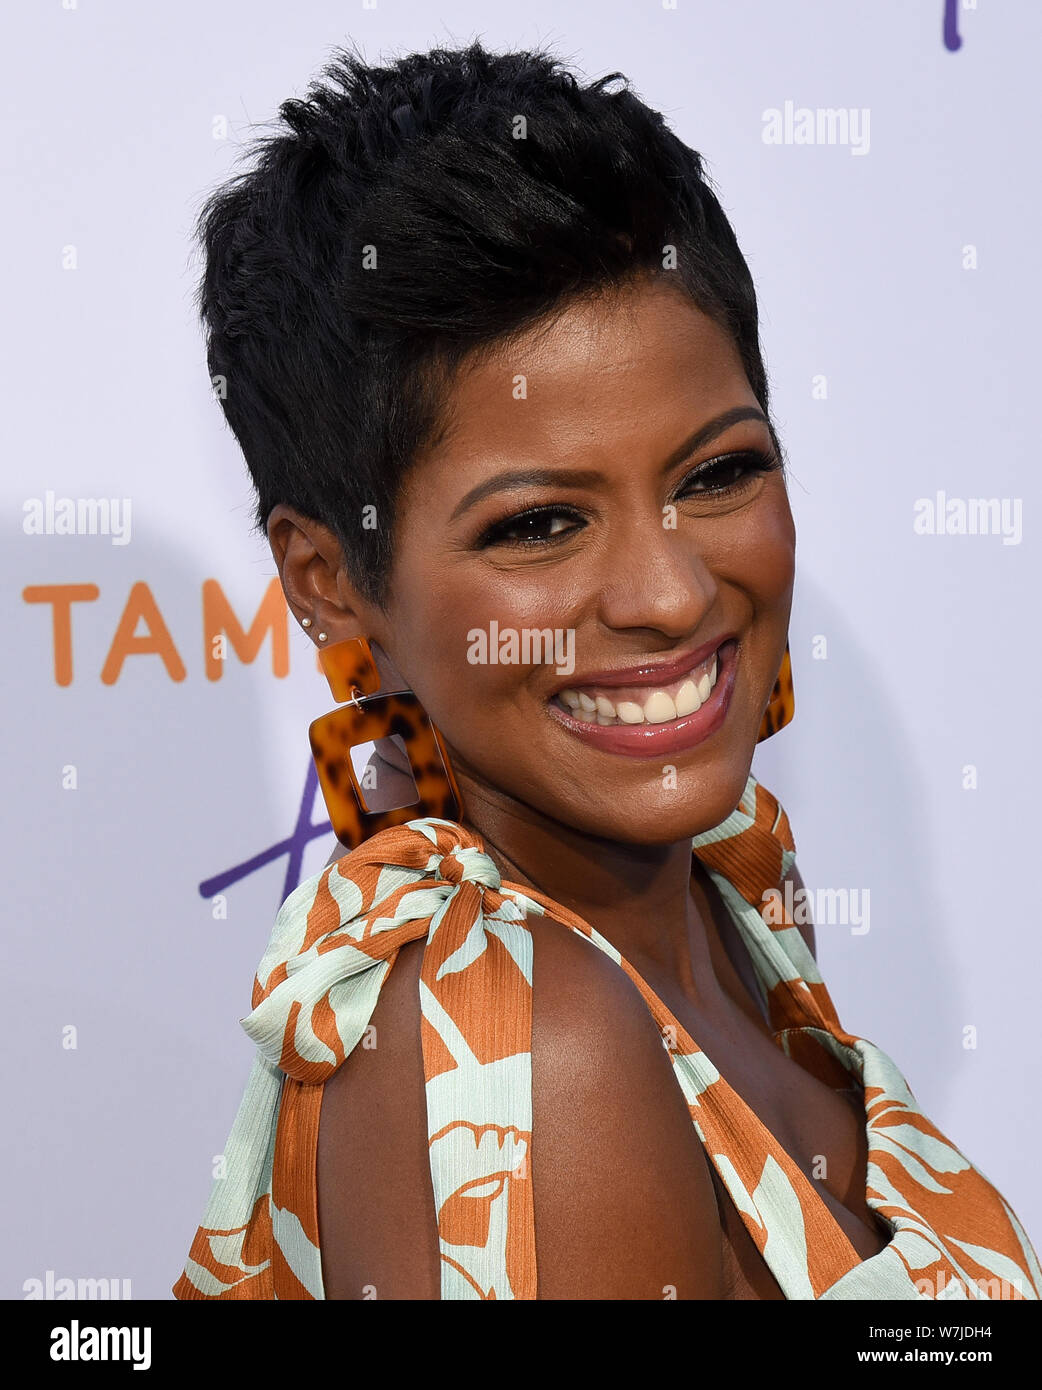 August 5, 2019, West Hollywood, California, USA: Tamron Hall attends ABC's TCA Summer Press Tour Carpet Event. (Credit Image: © Billy Bennight/ZUMA Wire) Stock Photo